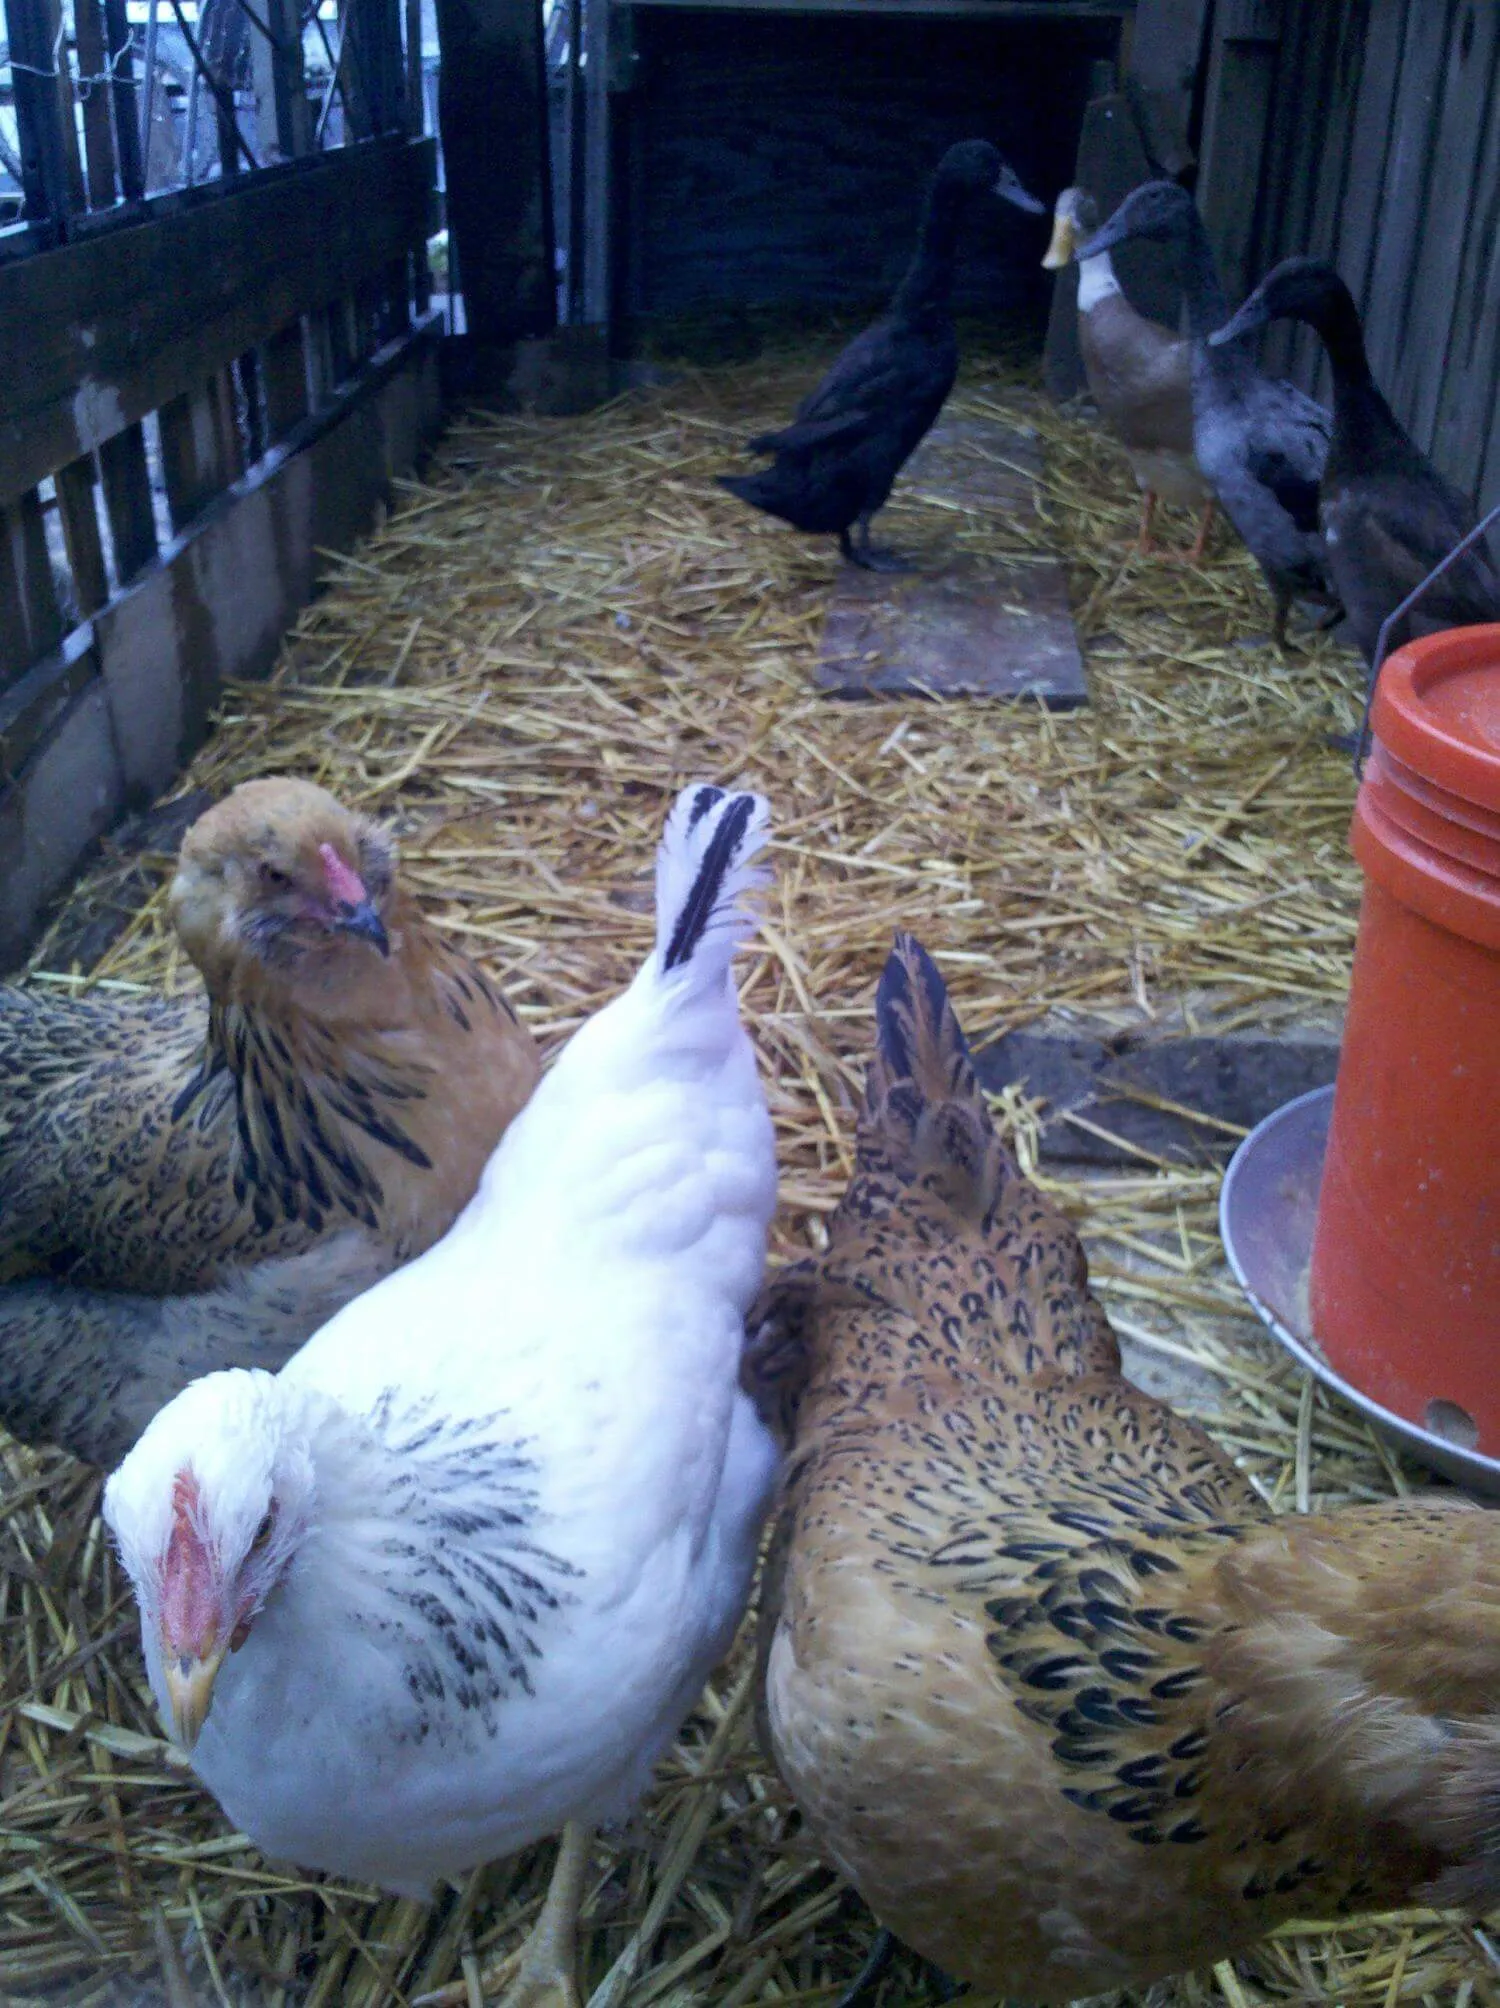 four ducks and three chickens sharing a coop